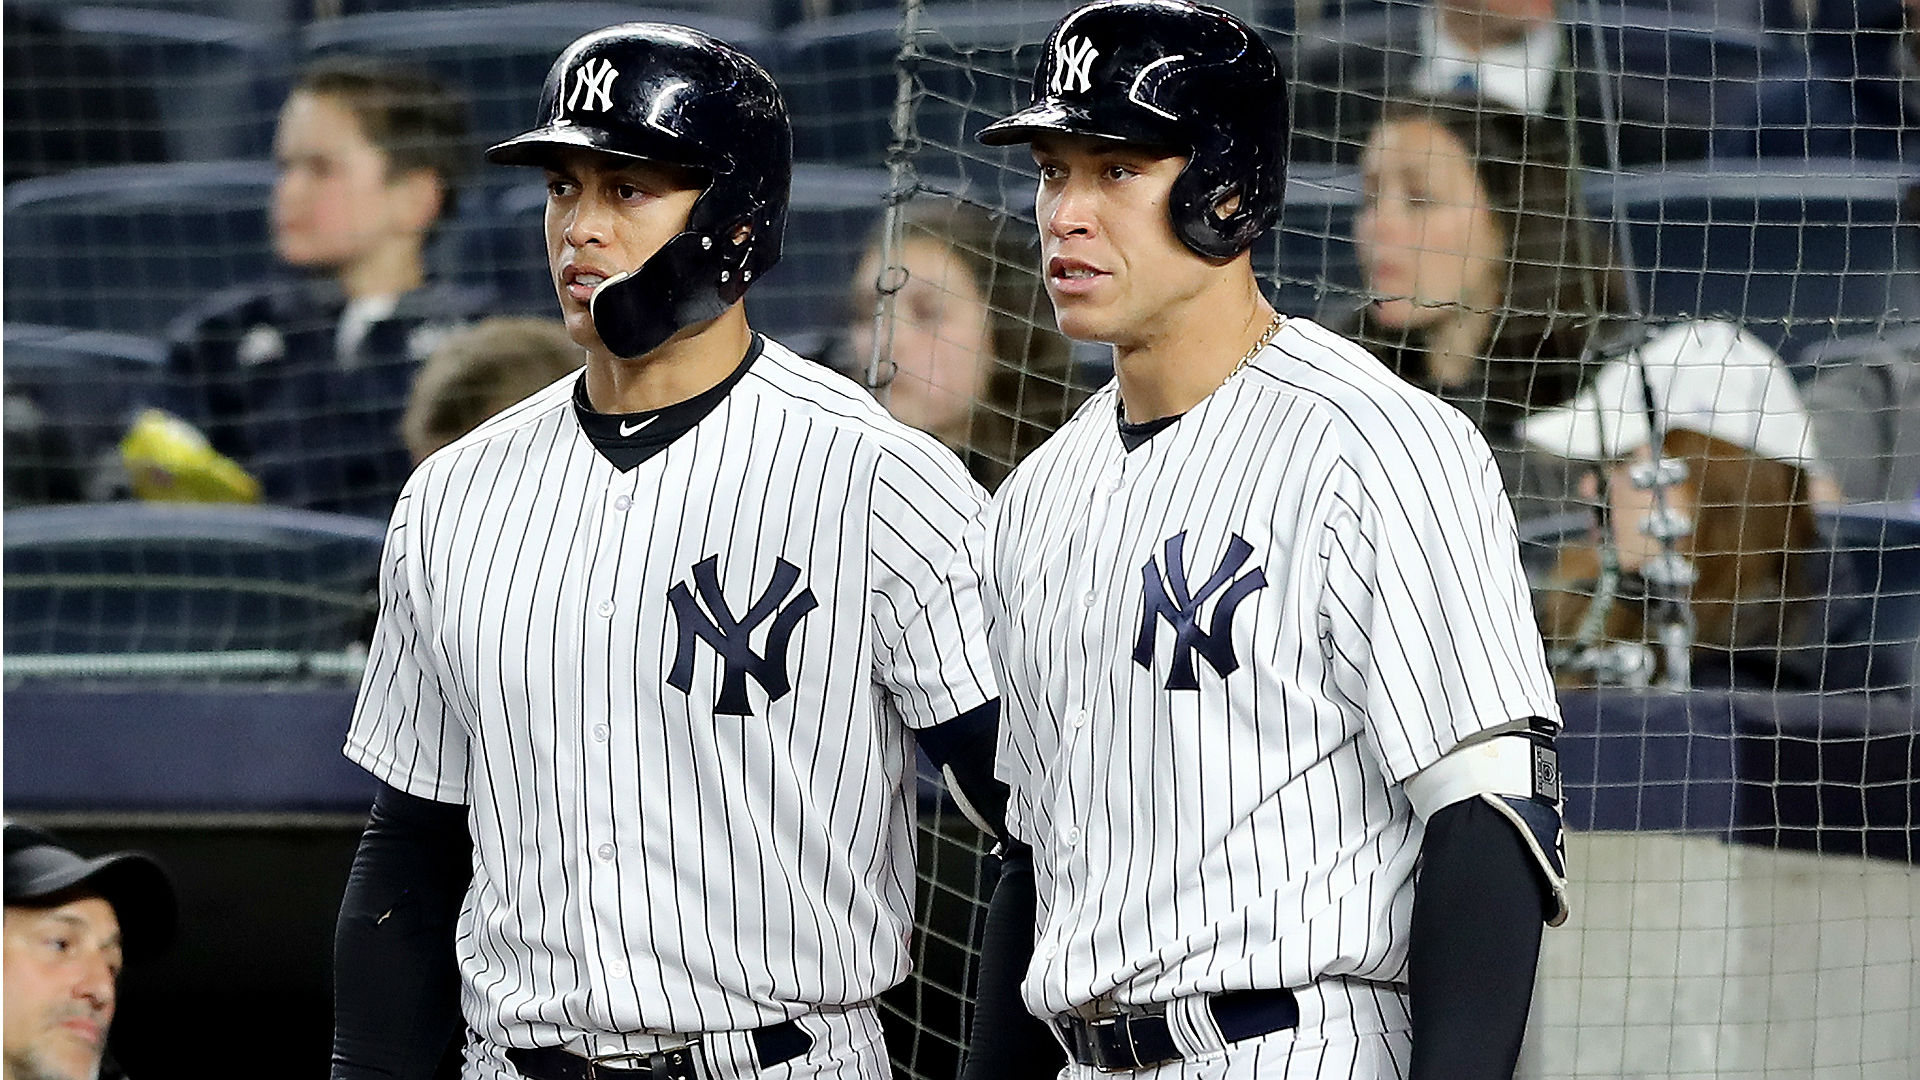 MLB wrap: Giancarlo Stanton, Aaron Judge lift Yankees to victory over Red Sox